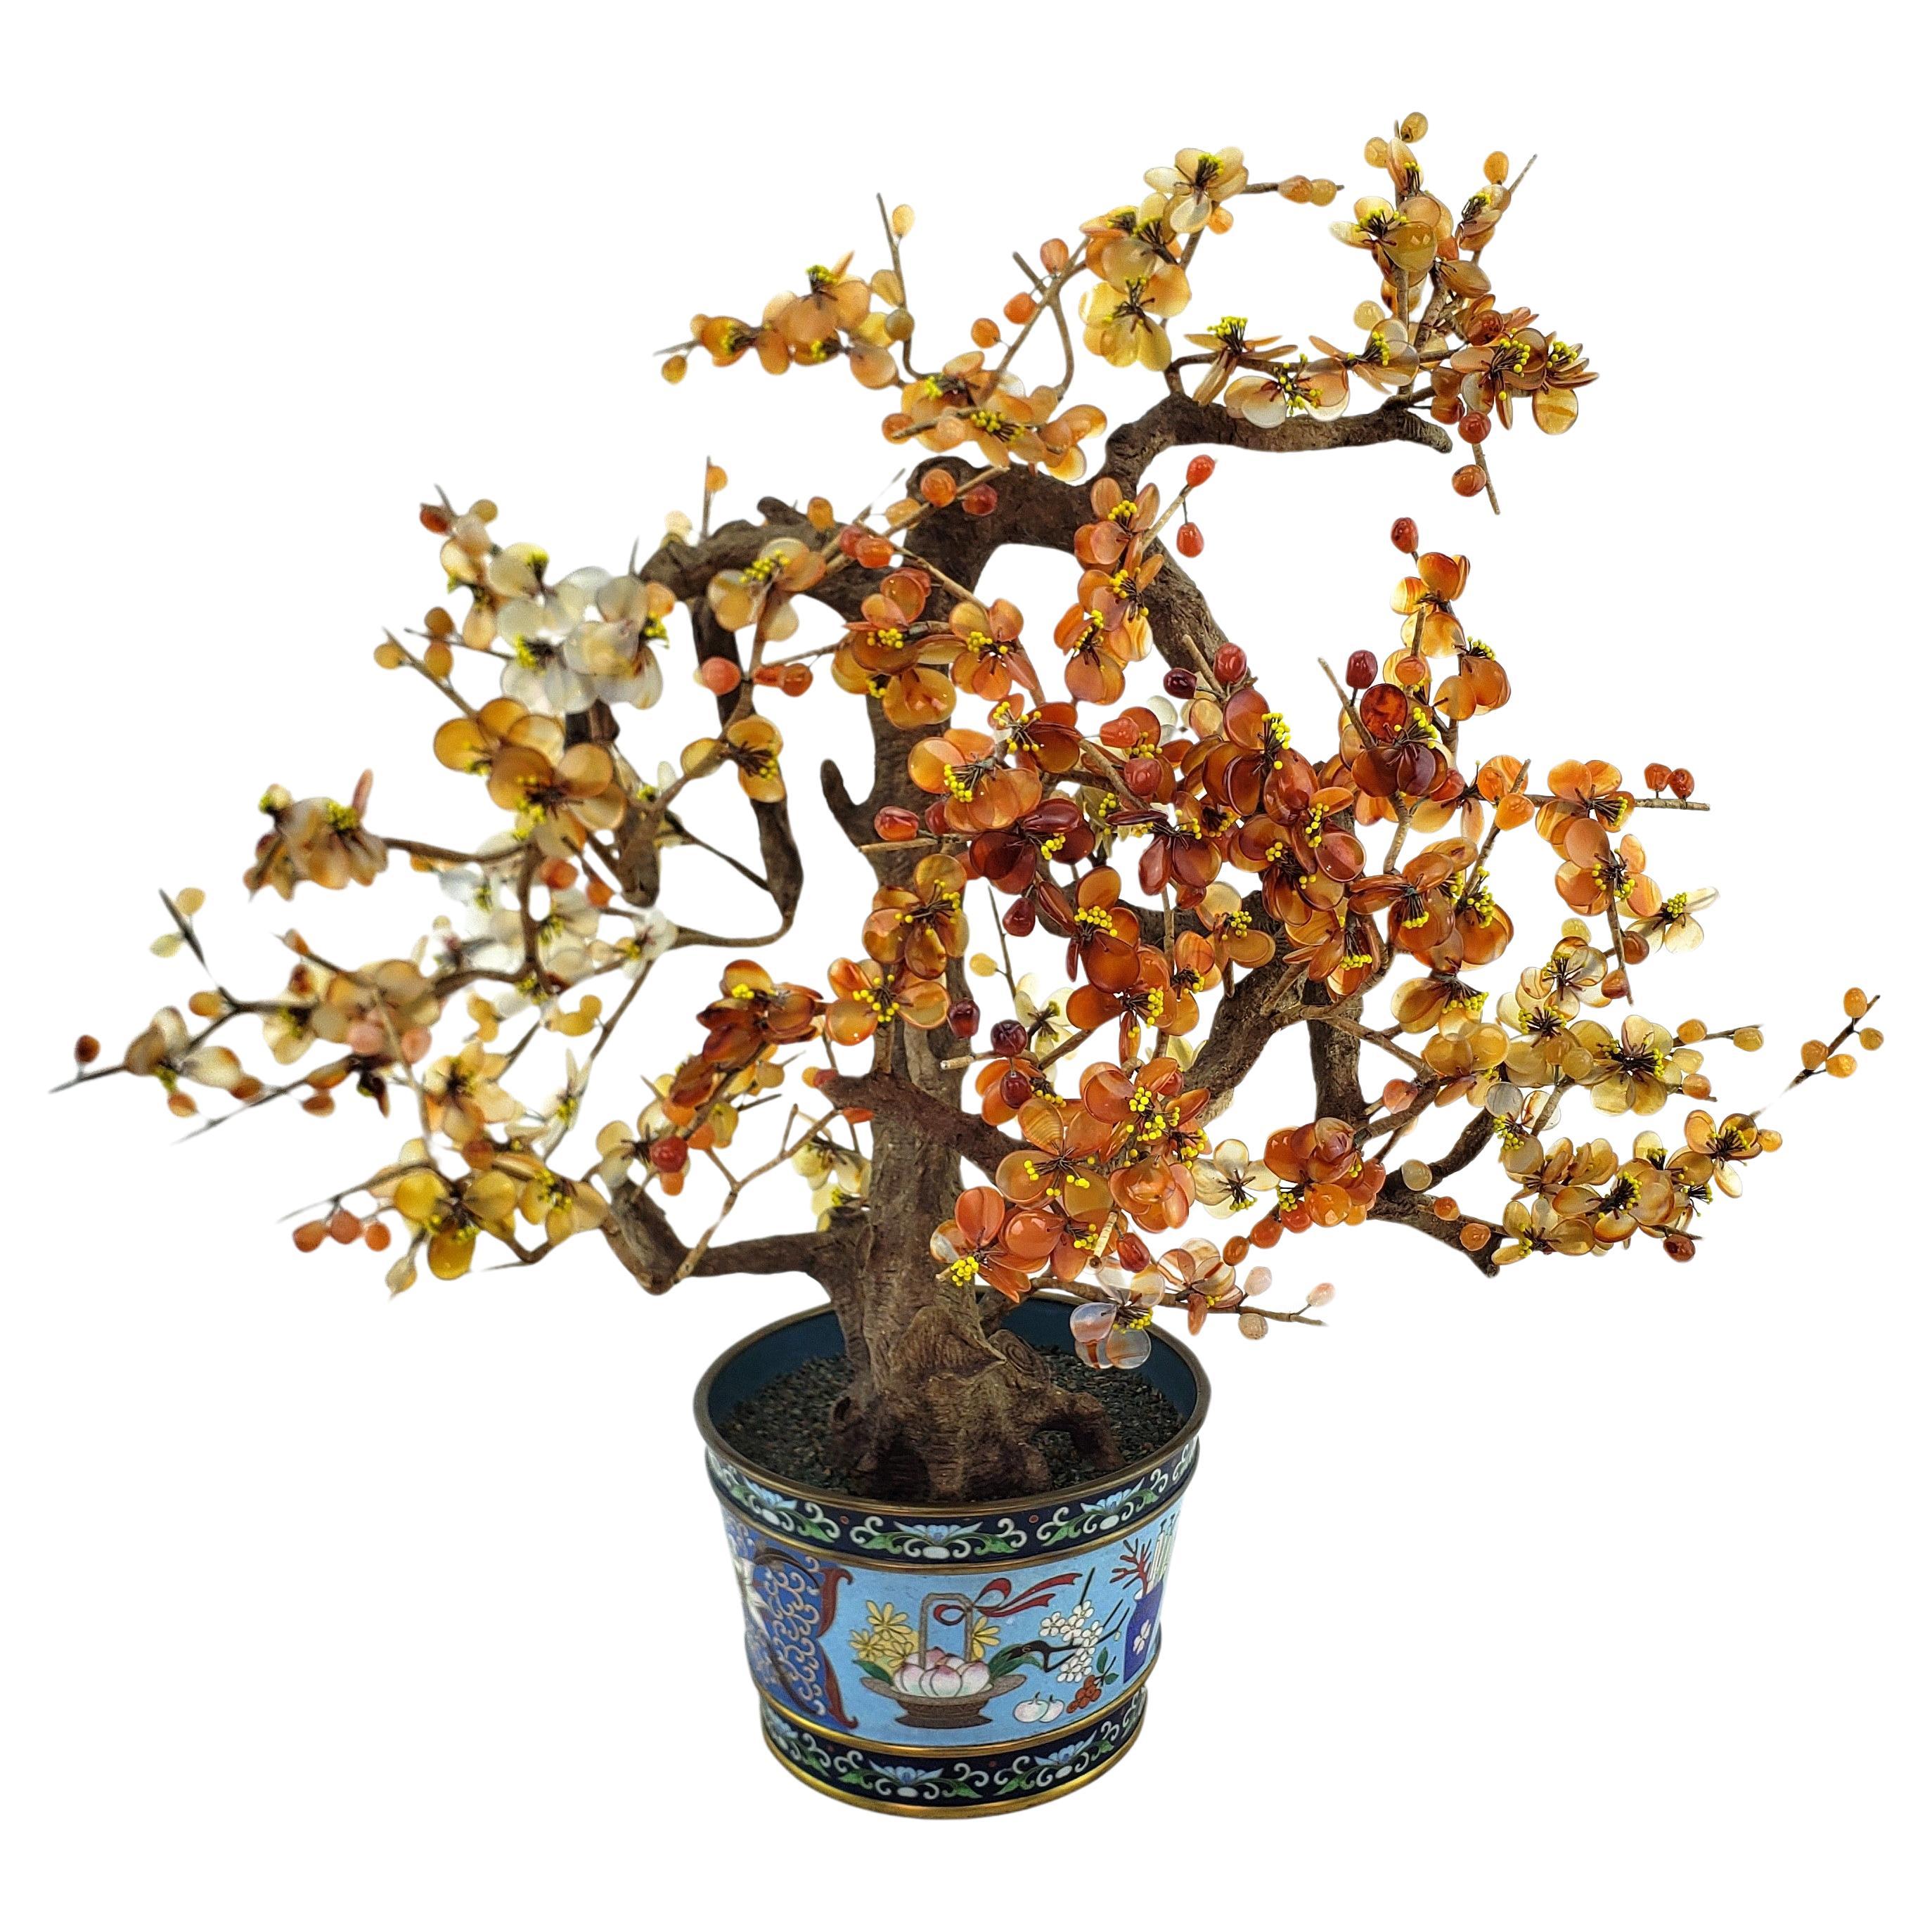 Antique Chinese Bonzai Styled Flowering Fruit Tree Sculpture with Cloisonne Pot